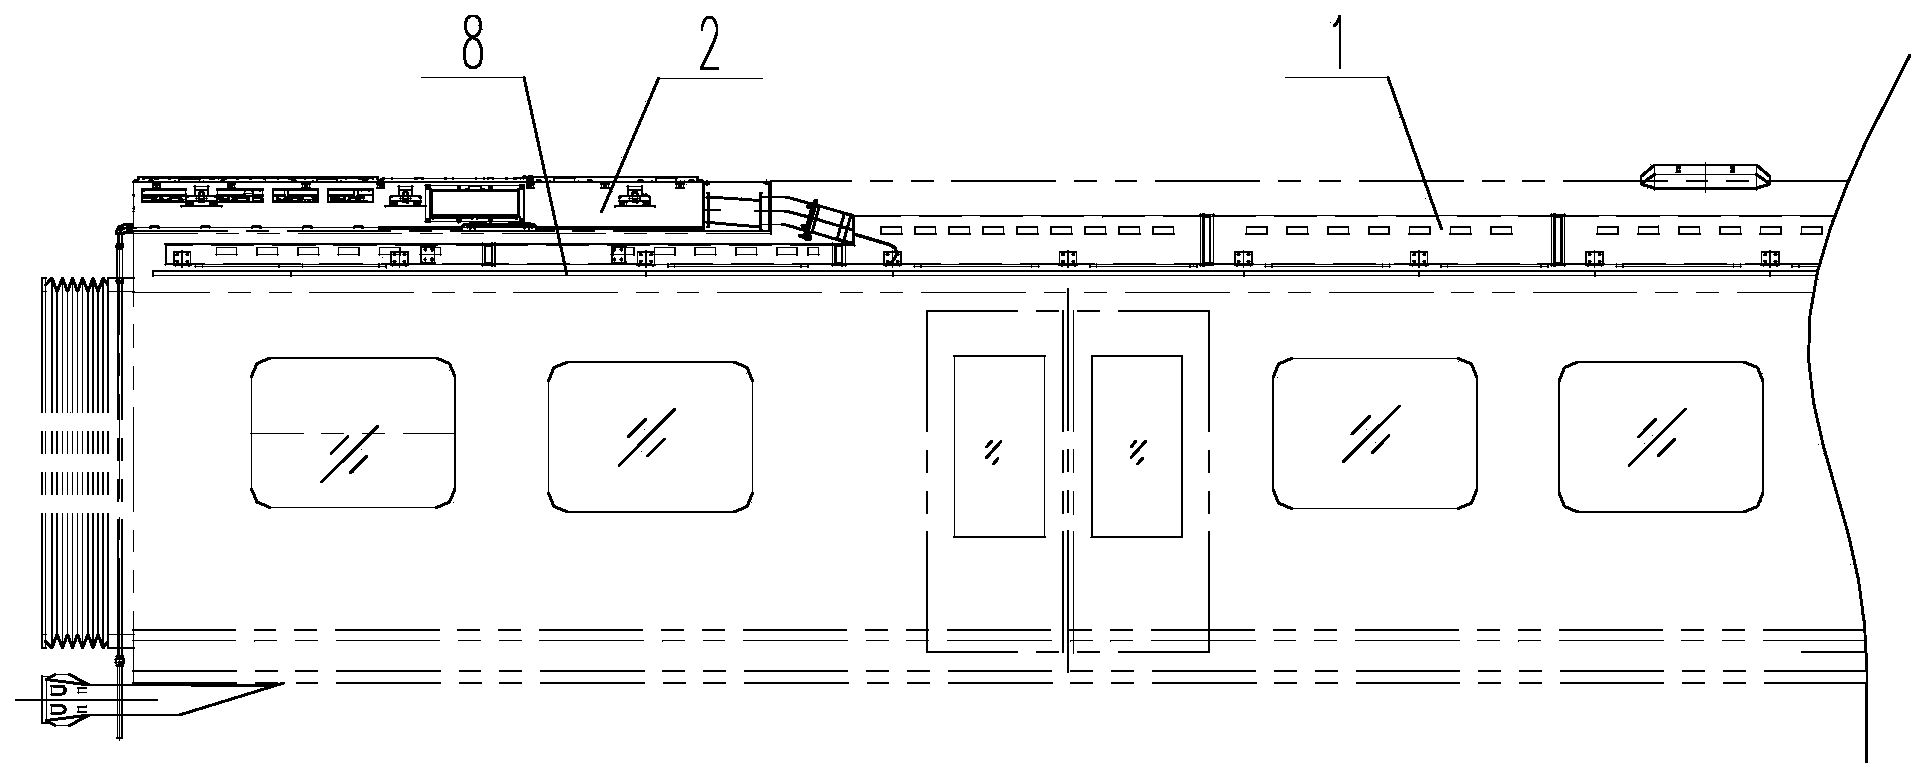 Railway-vehicle air-conditioner air supplying and returning system